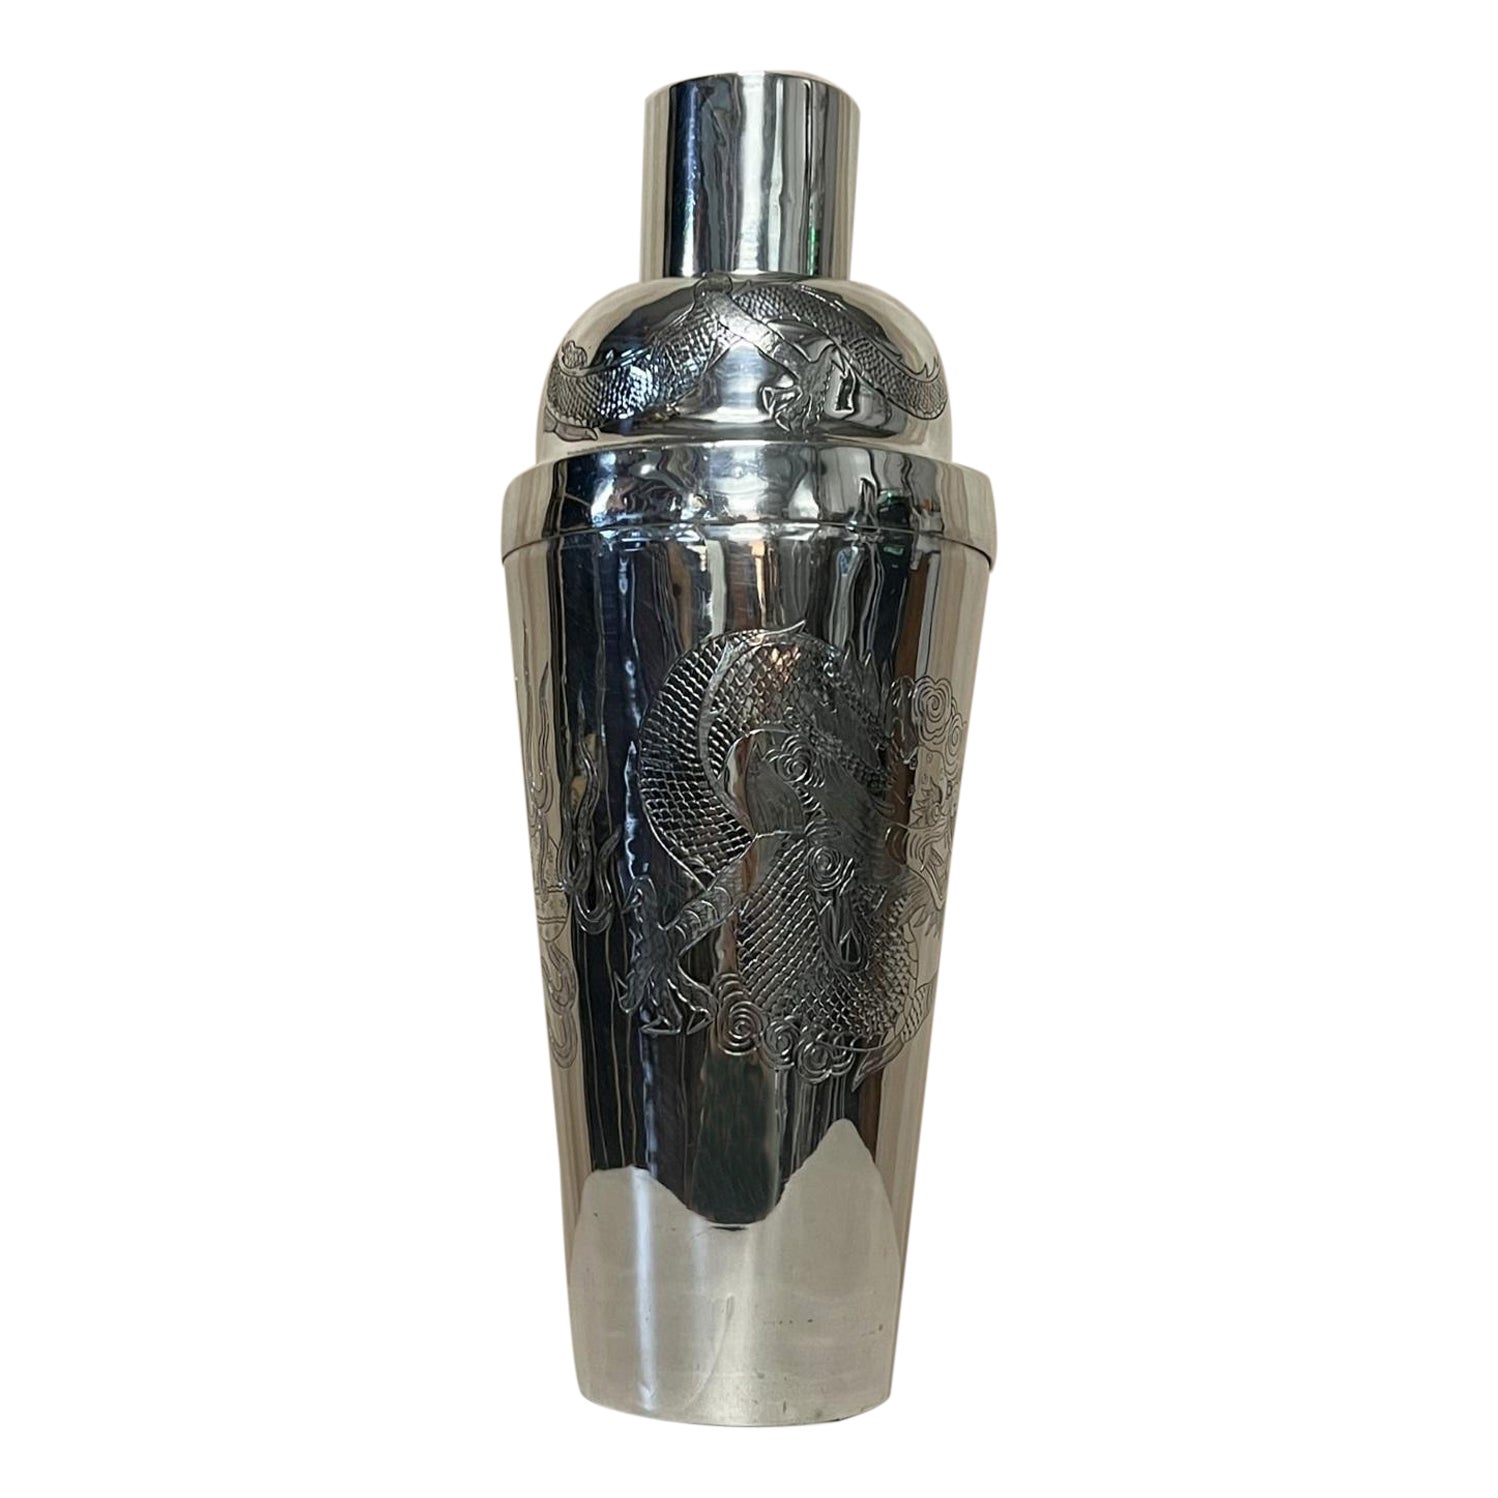 STUNNING ANTIQUE CIRA 1900 STERLING SILVER CHiNESE EXPORT DRAGON COCKTAIL SHAKER For Sale